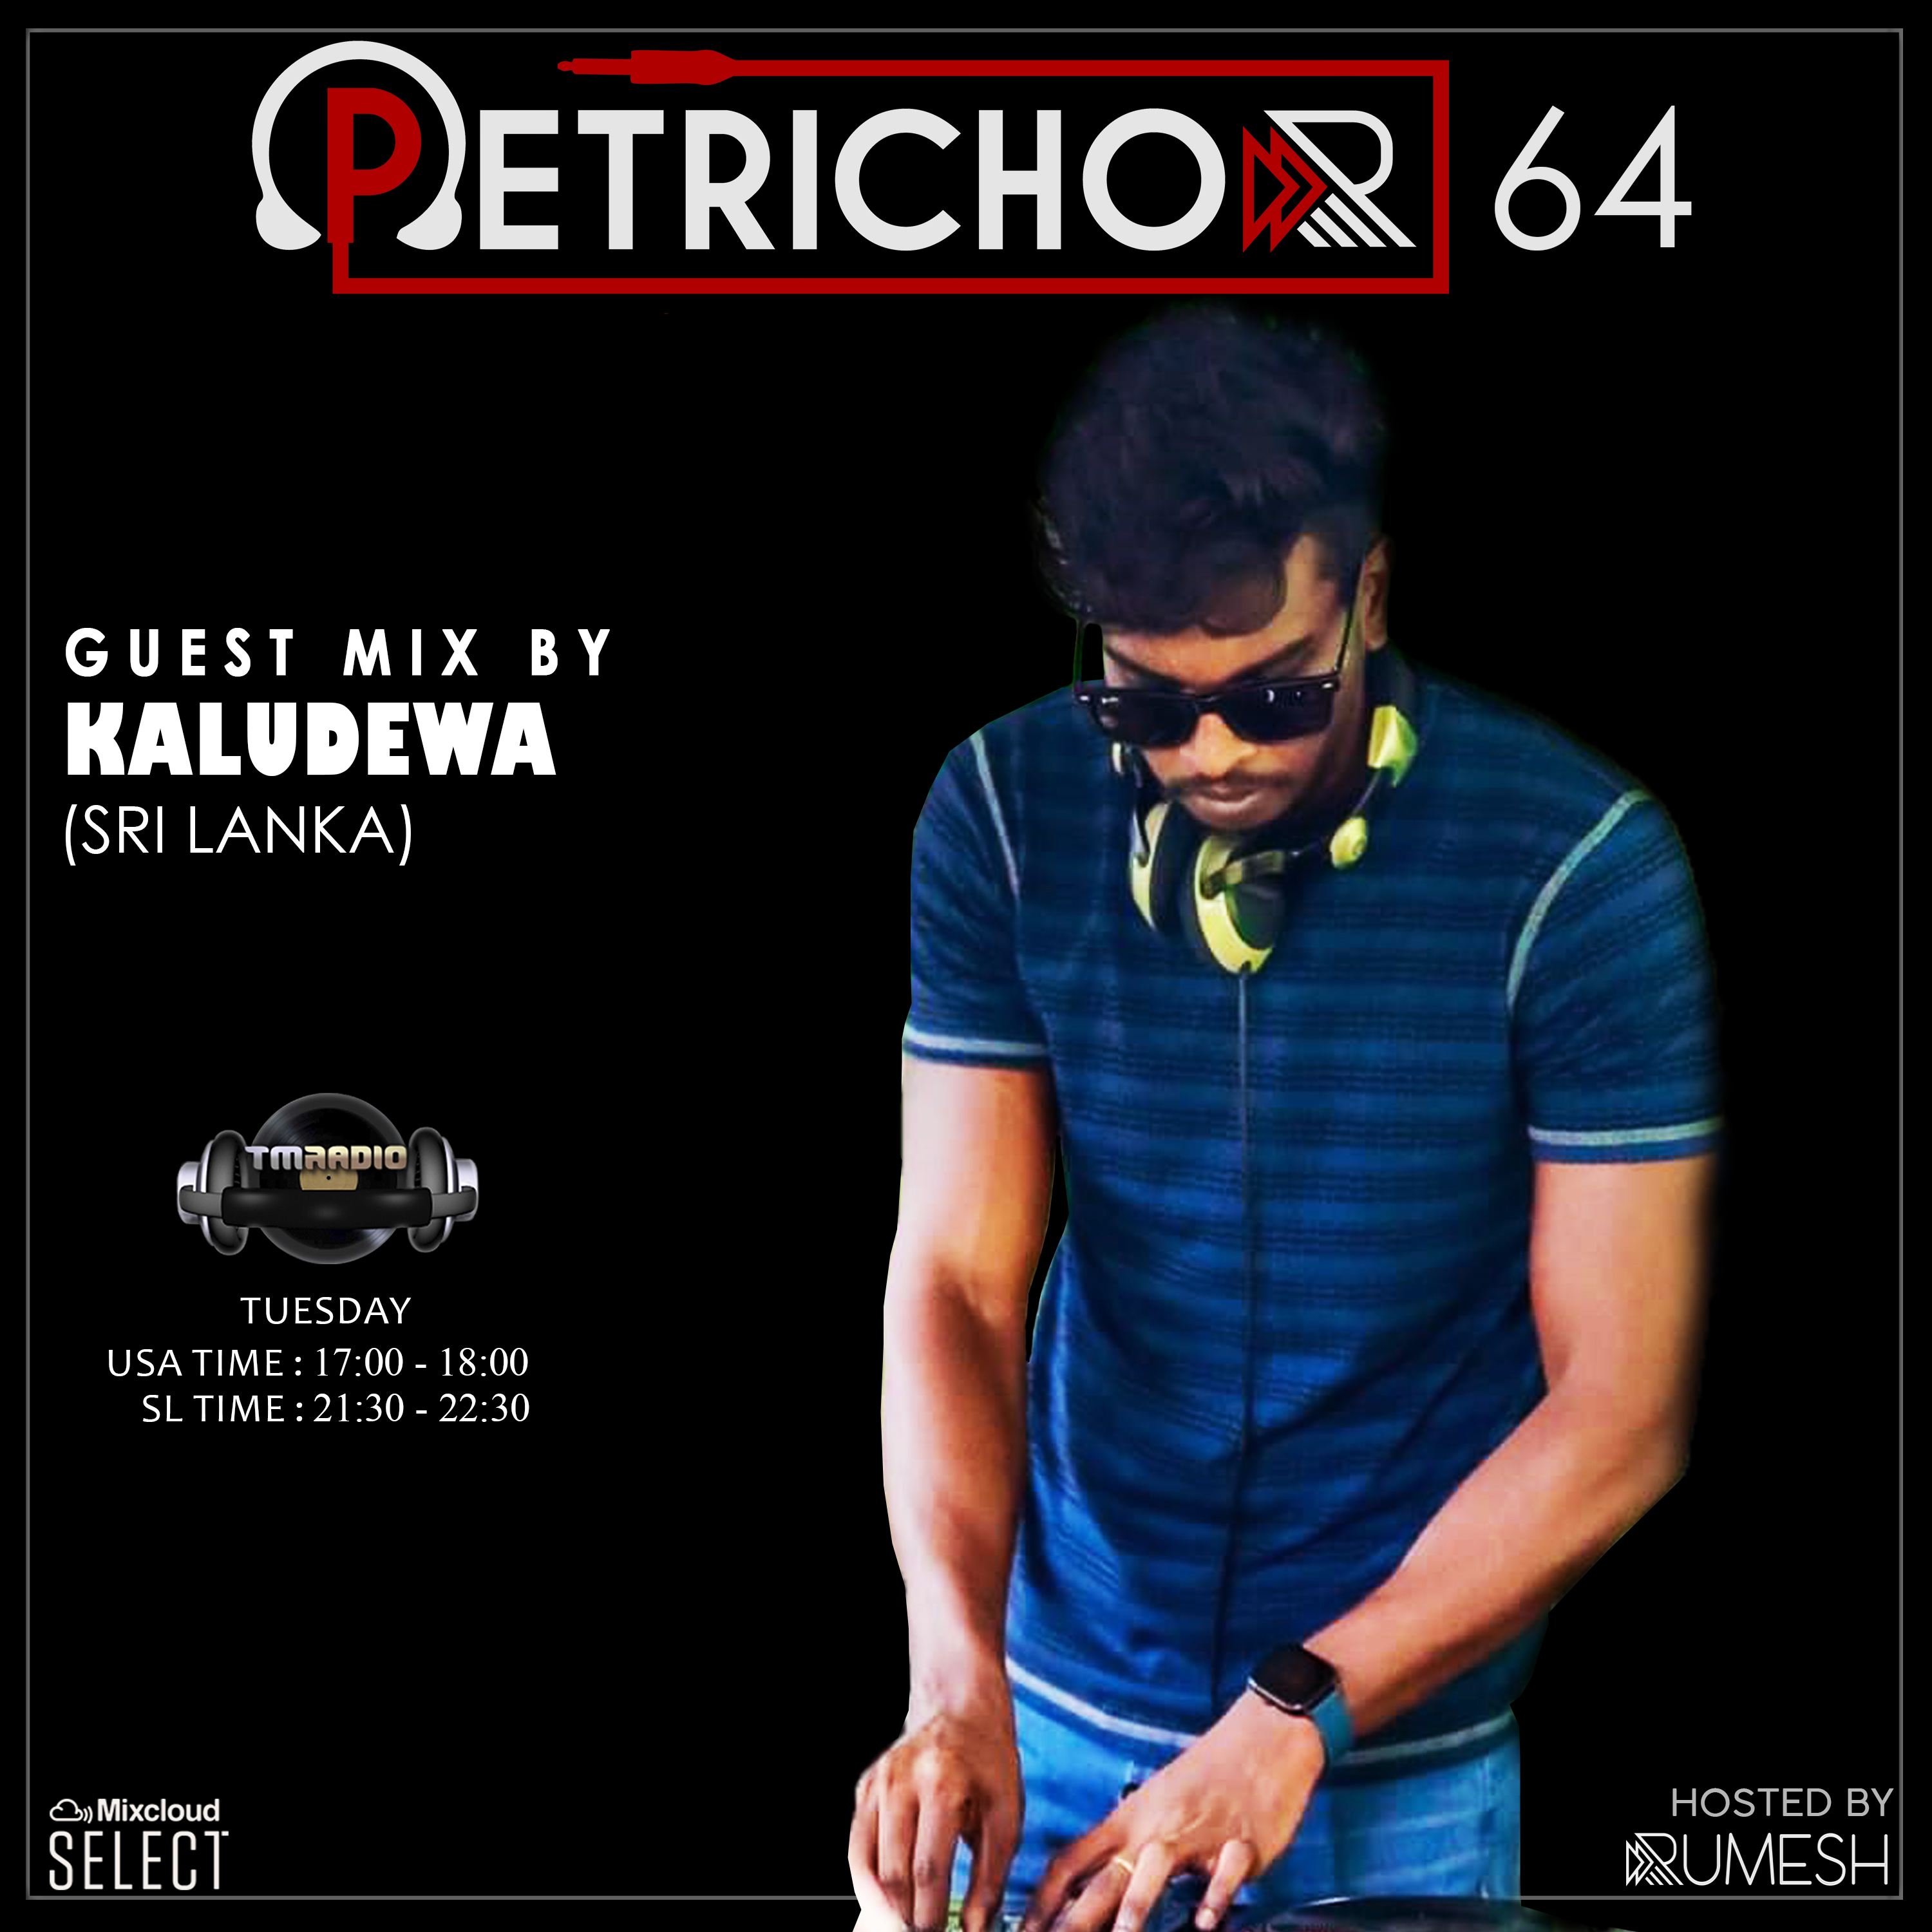 Petrichor :: Petrichor 64 guest mix by Kaludewa (Sri Lanka) (aired on January 28th, 2020) banner logo